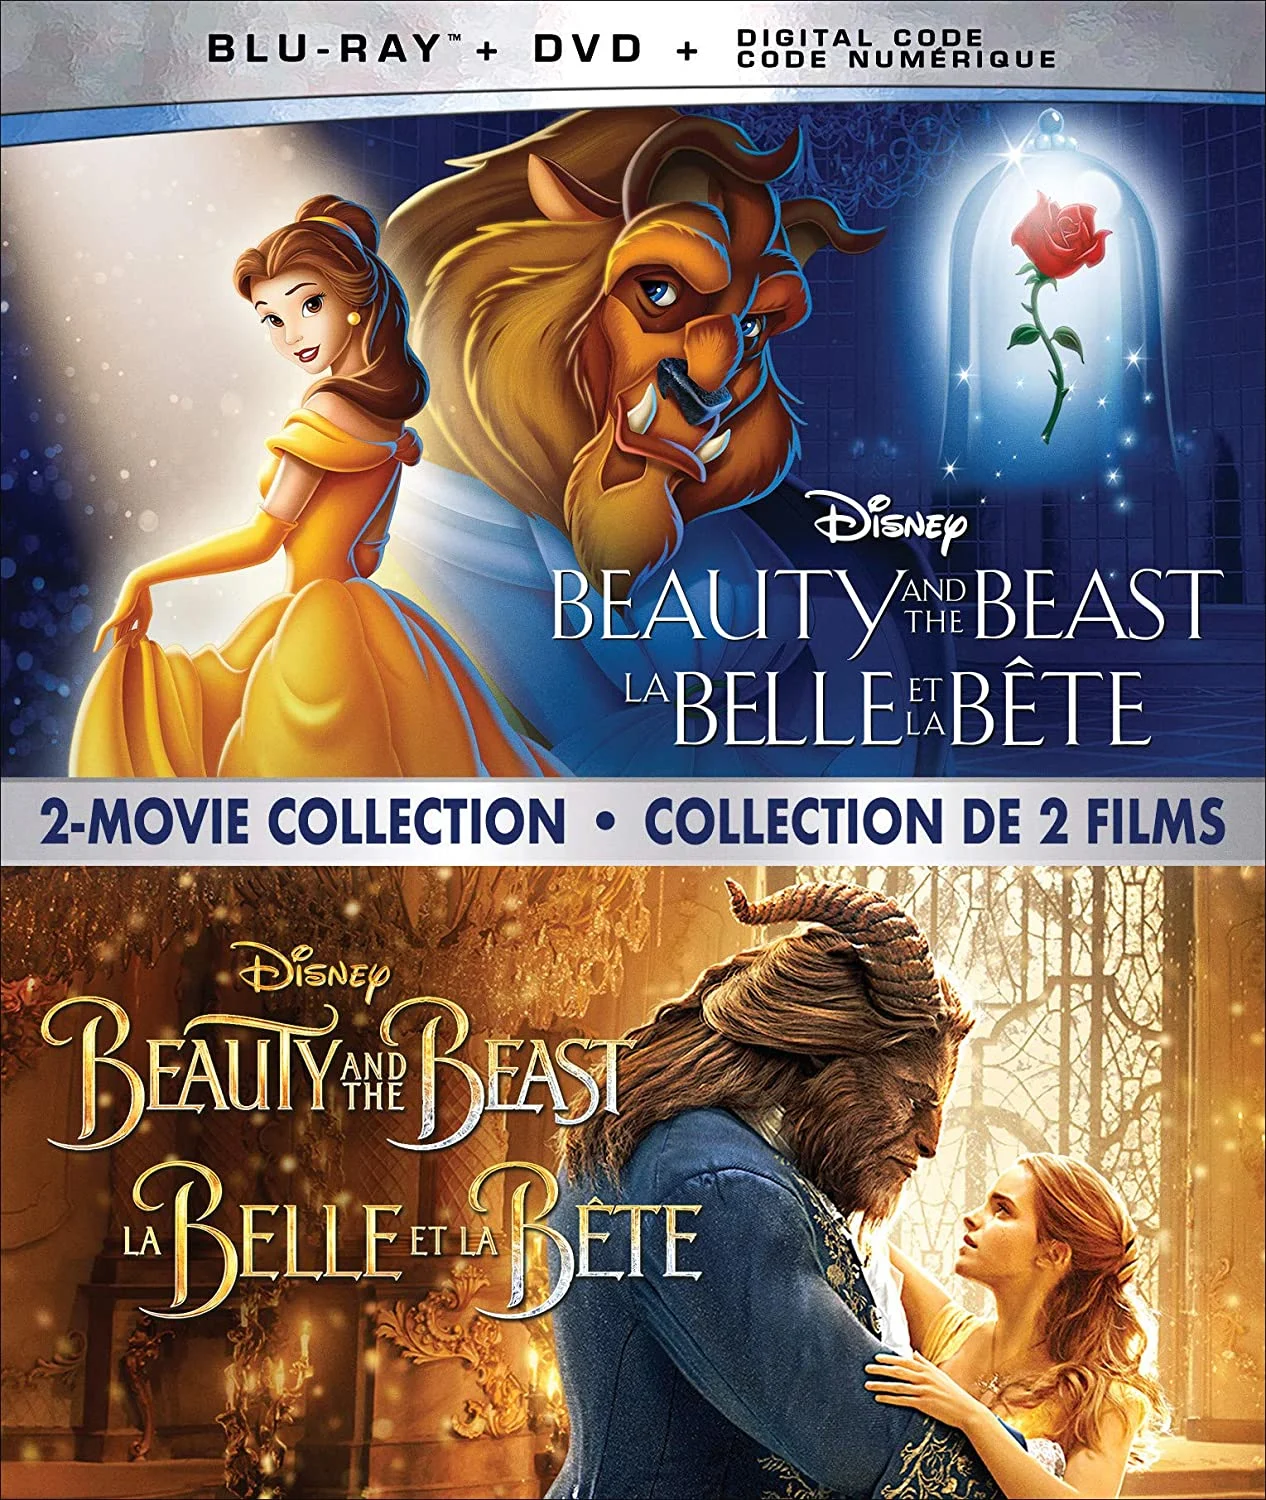 Beauty and the Beast – 2 Movie Collection (Animated/Live Action) (Blu-ray/DVD Combo) on MovieShack